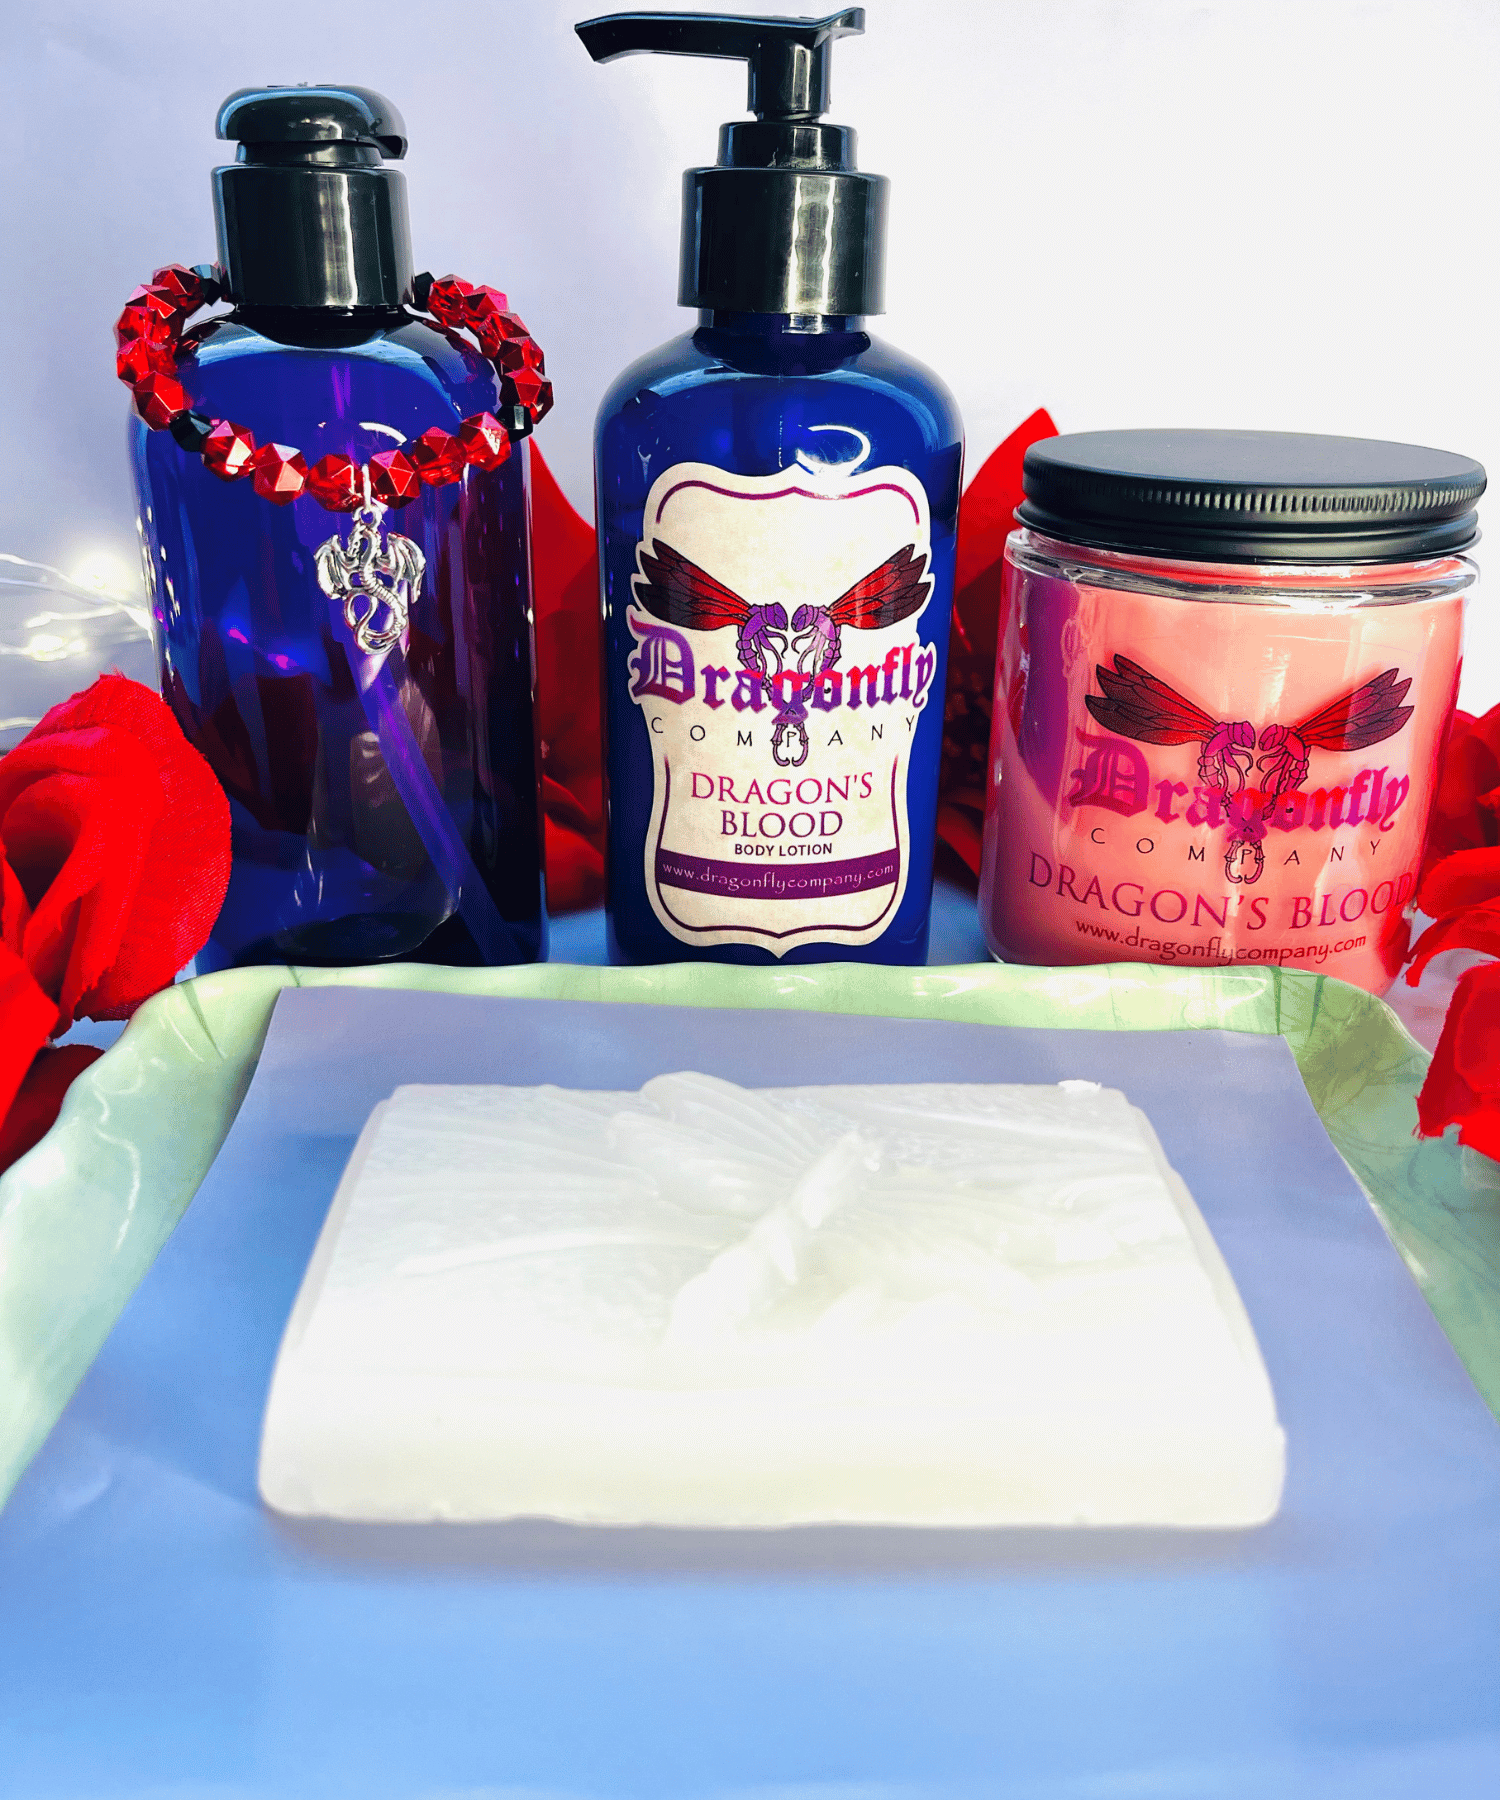 This Bundle comes with a 5oz soap, 10oz lotion, 8oz candle and one bracelet .